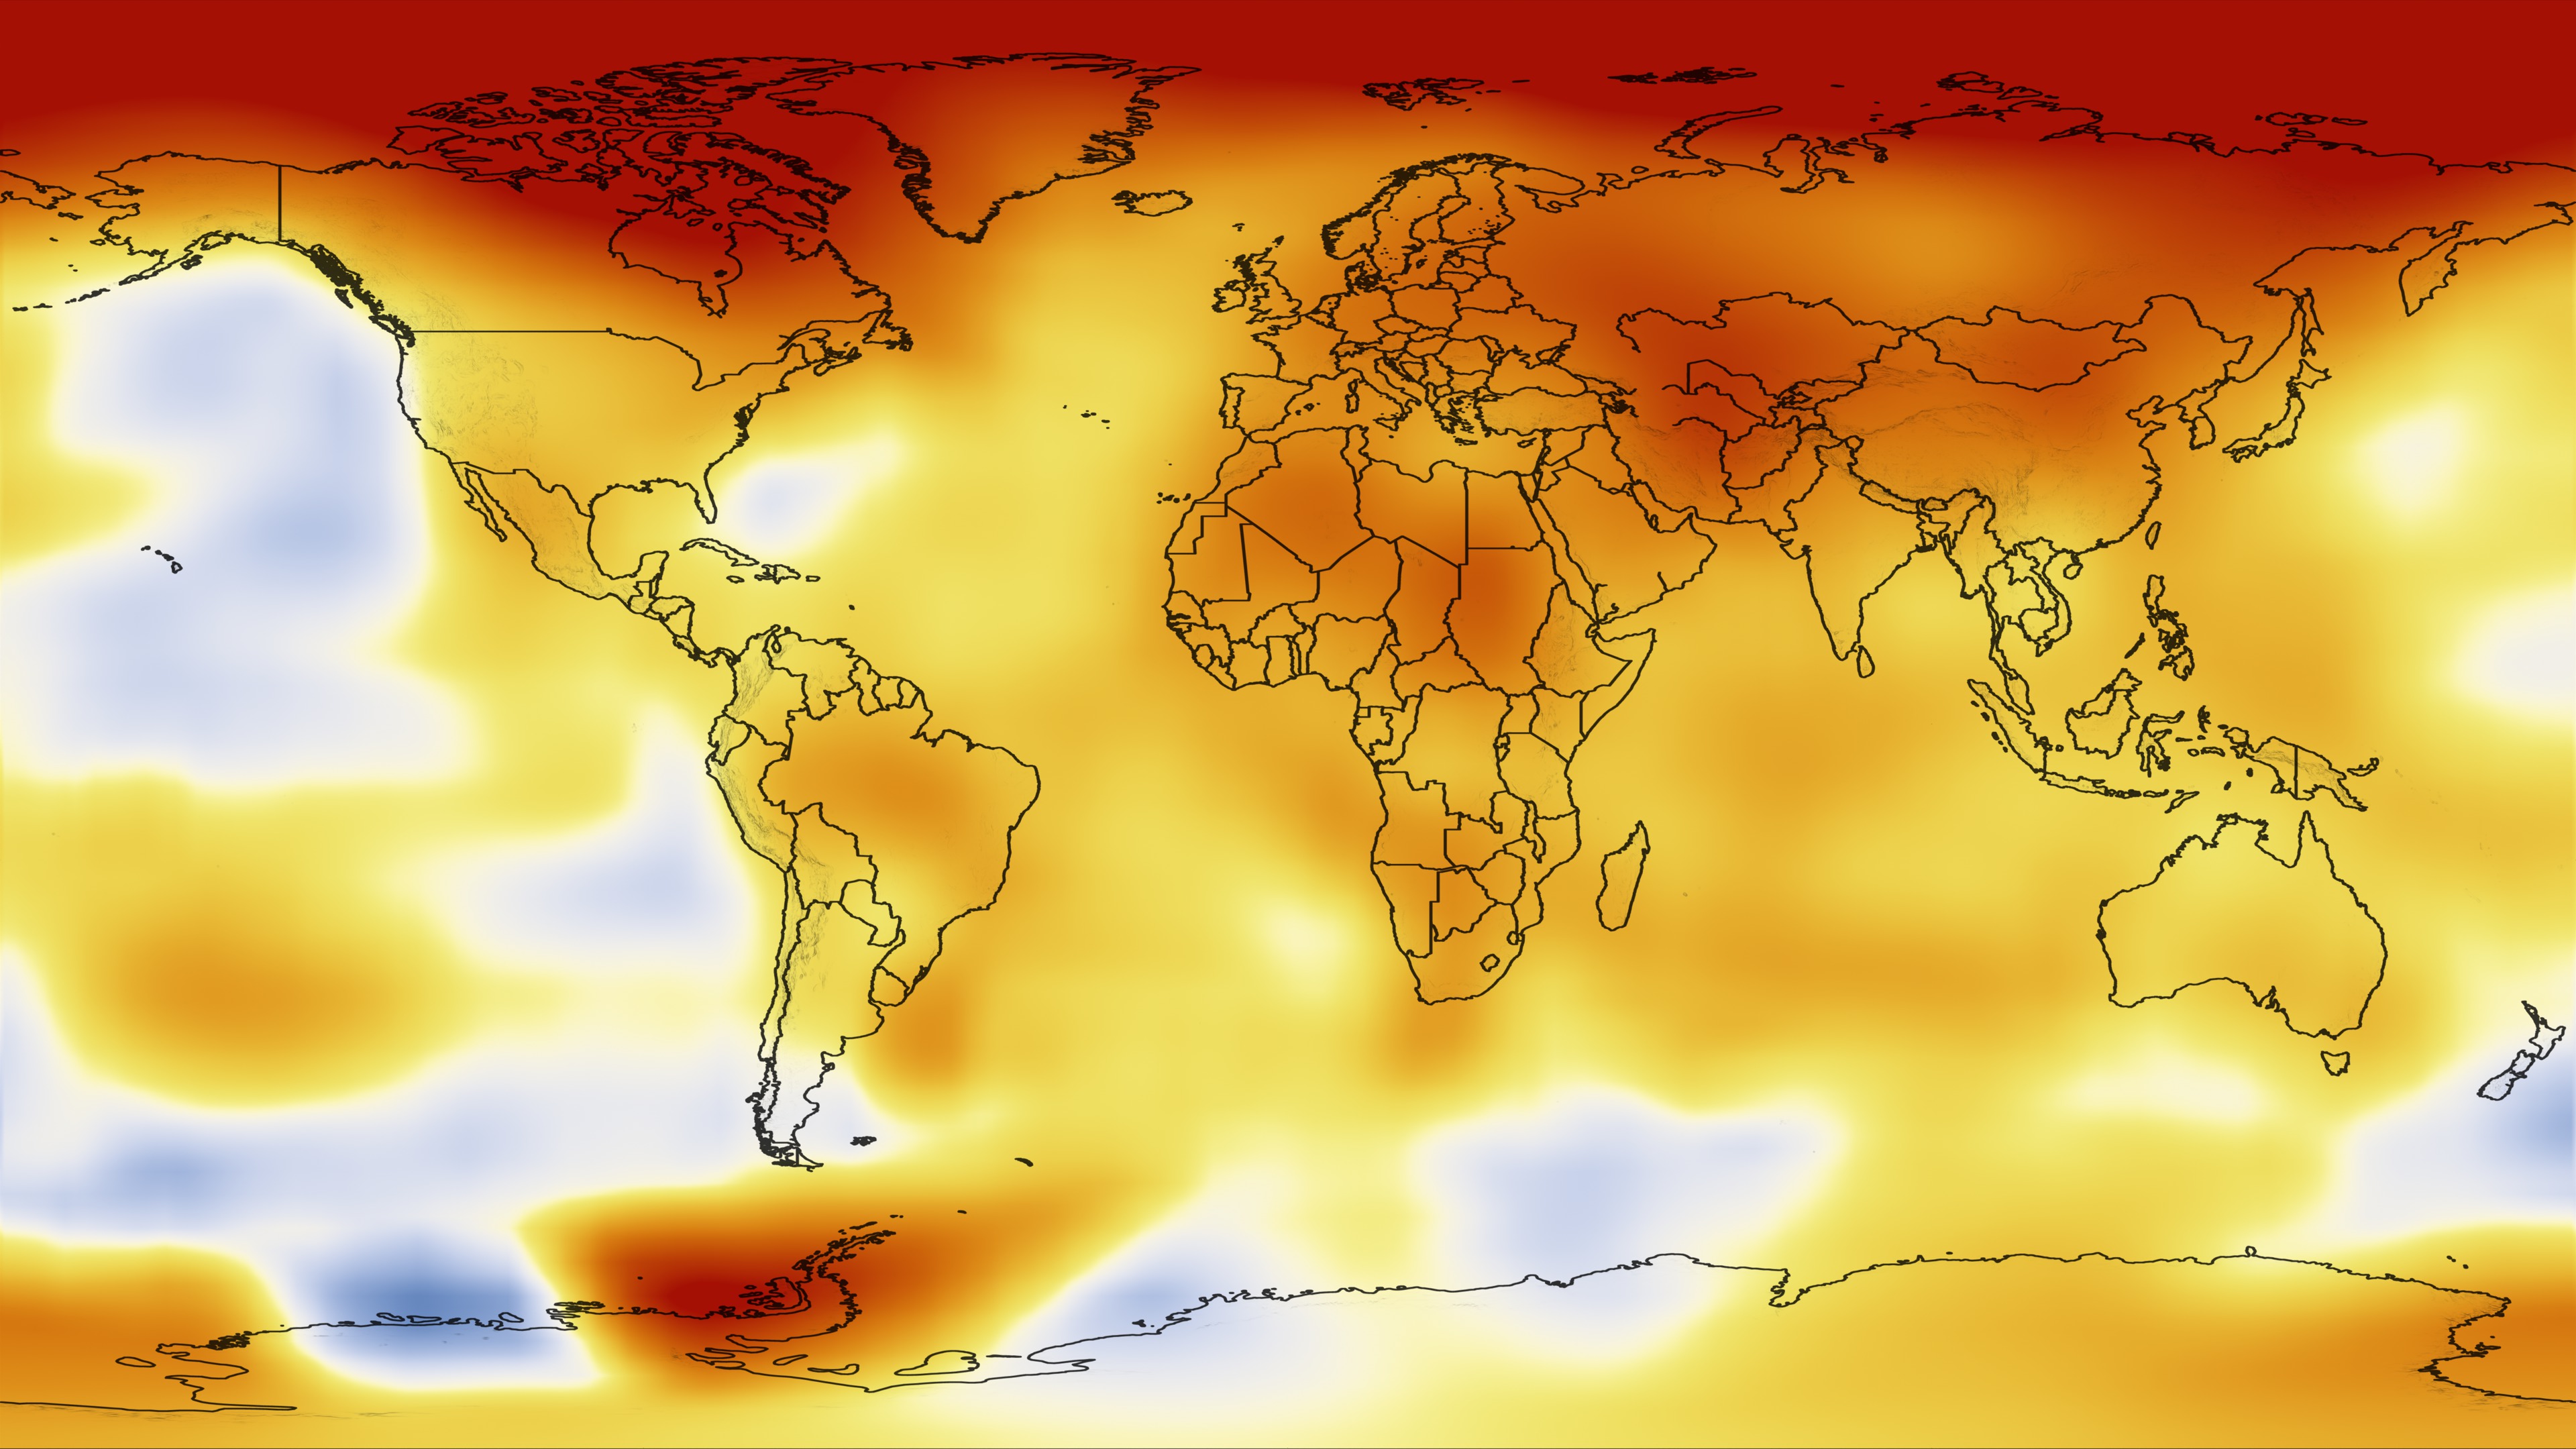 This color-coded map displays a progression of changing global surface temperatures anomalies from 1880 through 2010. The final frame represents global temperature anomalies averaged from 2006 to 2010.